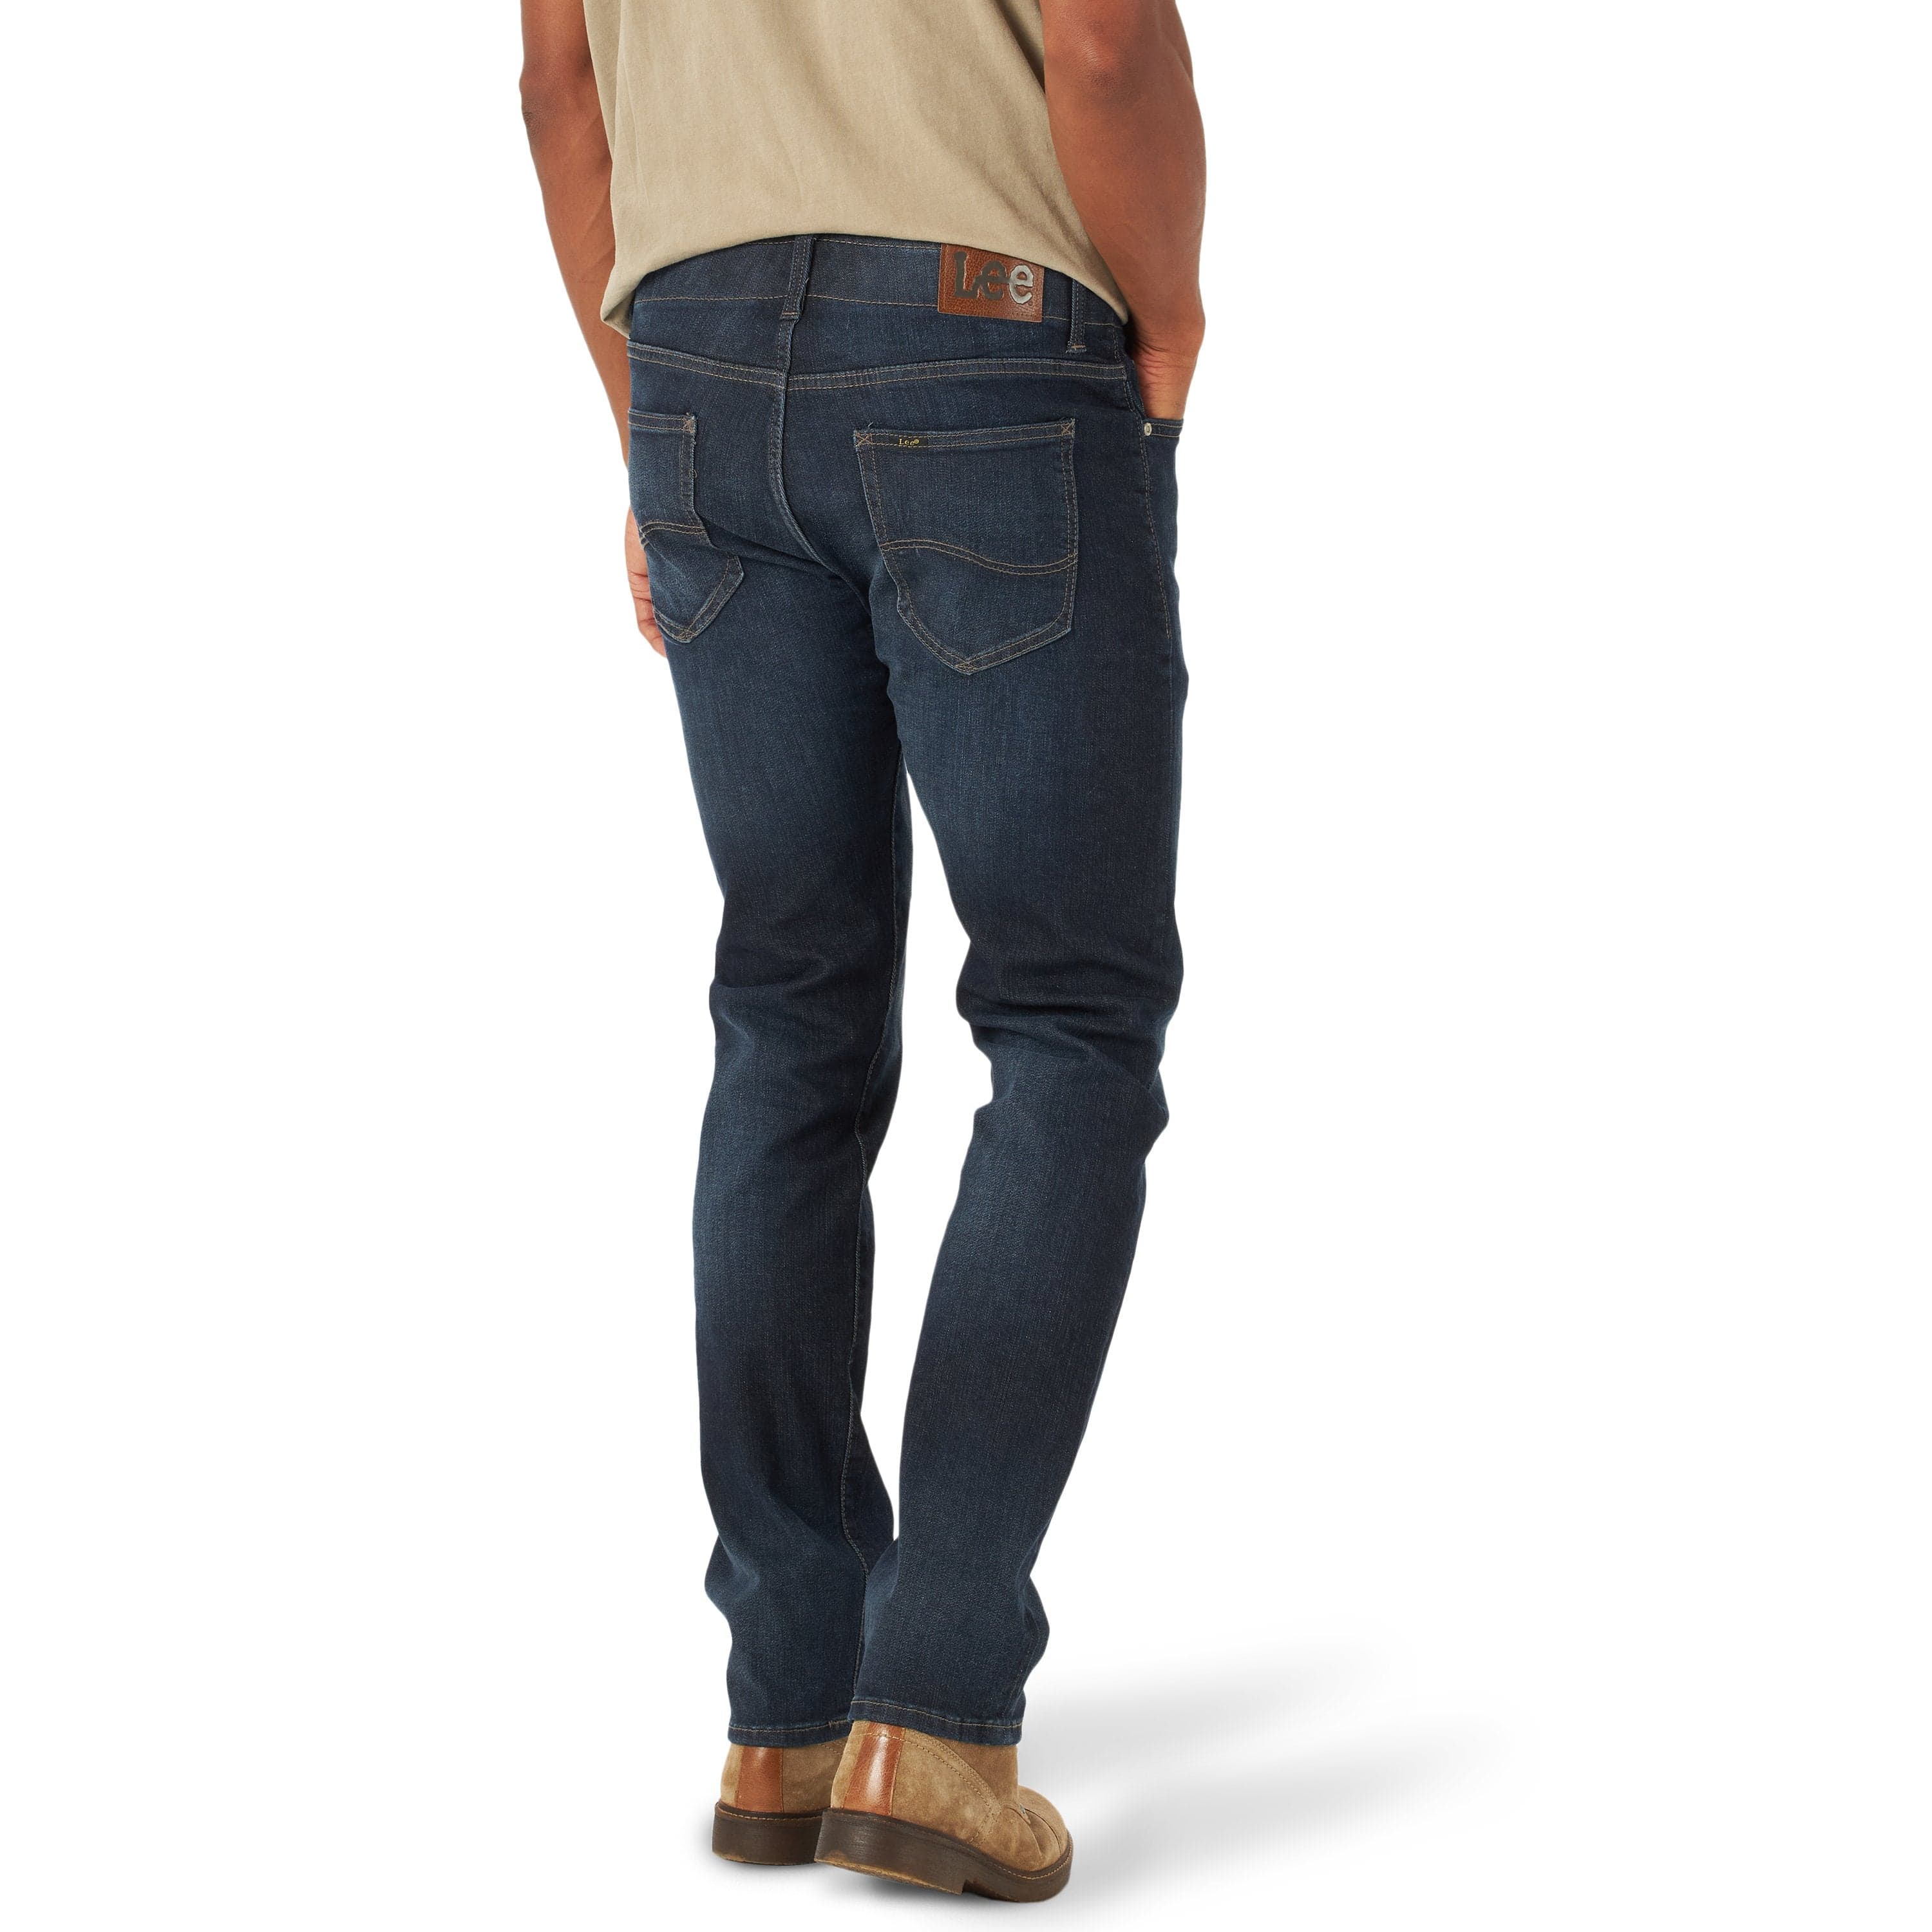 Lee Men's Extreme Motion Slim Straight Leg Jeans 2015450 - Russell's  Western Wear, Inc.